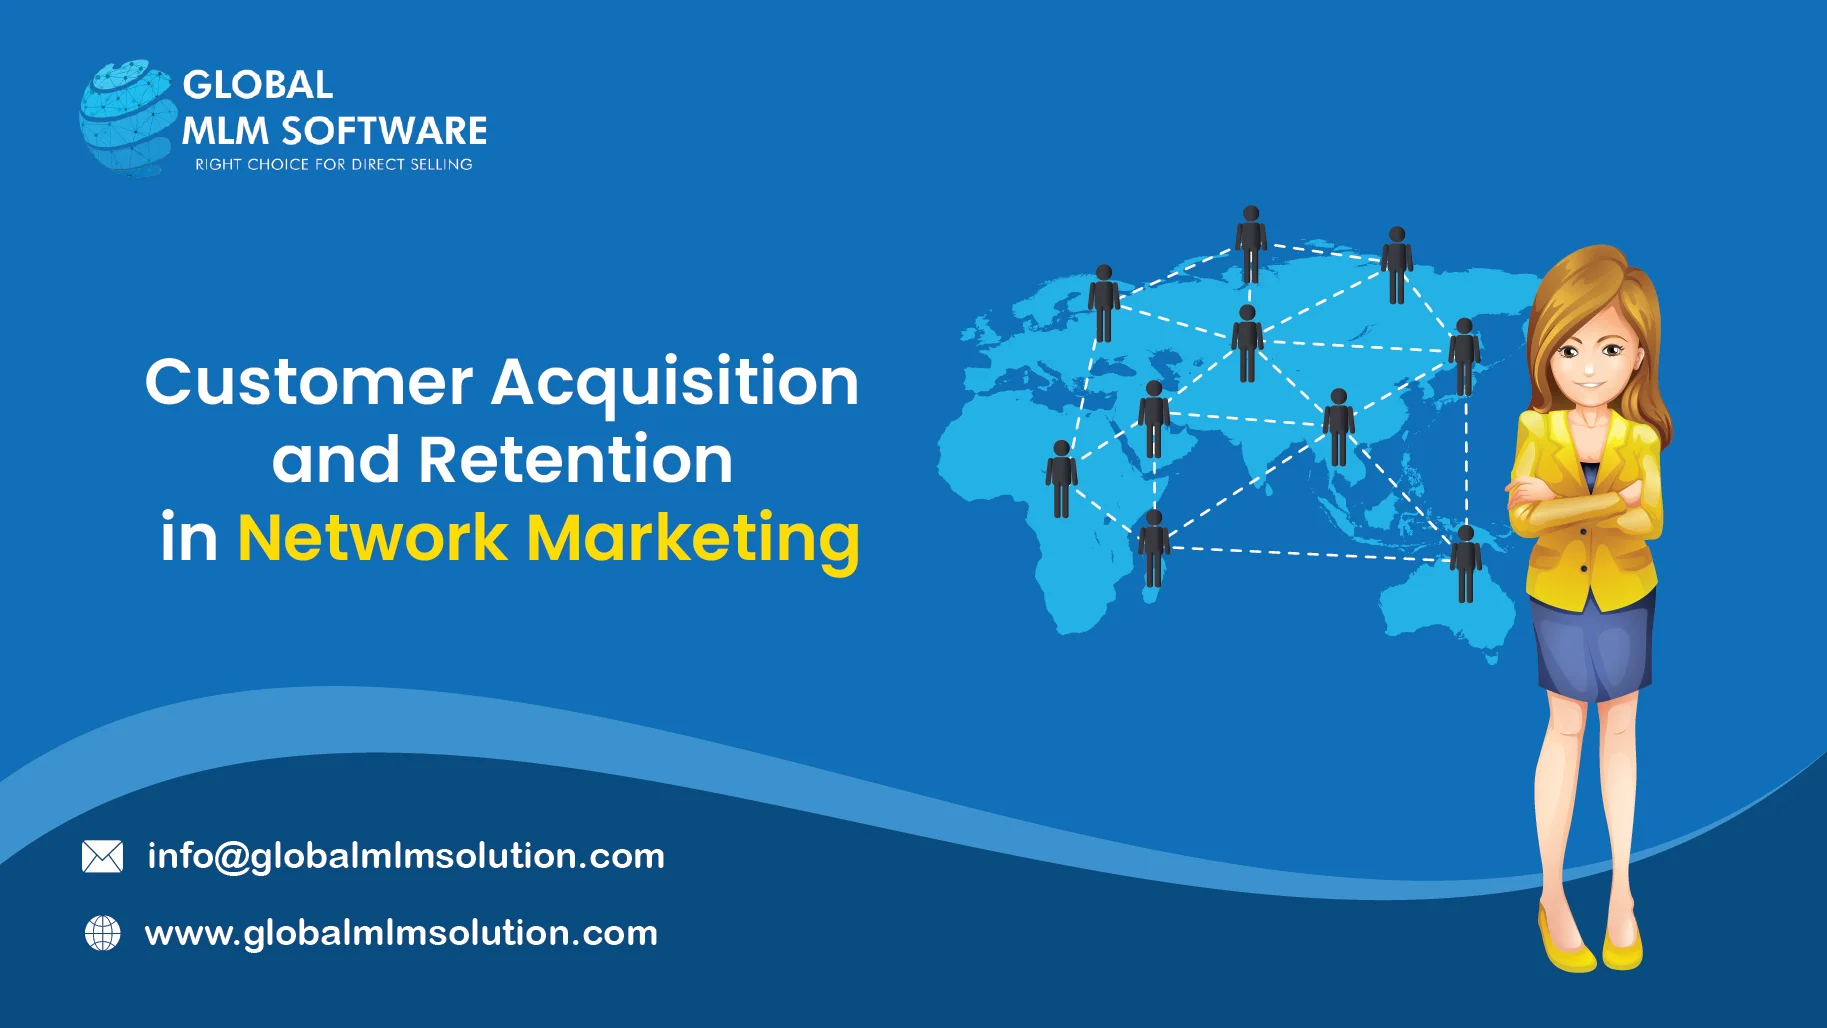 5 Proven Tips to Customer Acquisition and Retention in Network Marketing